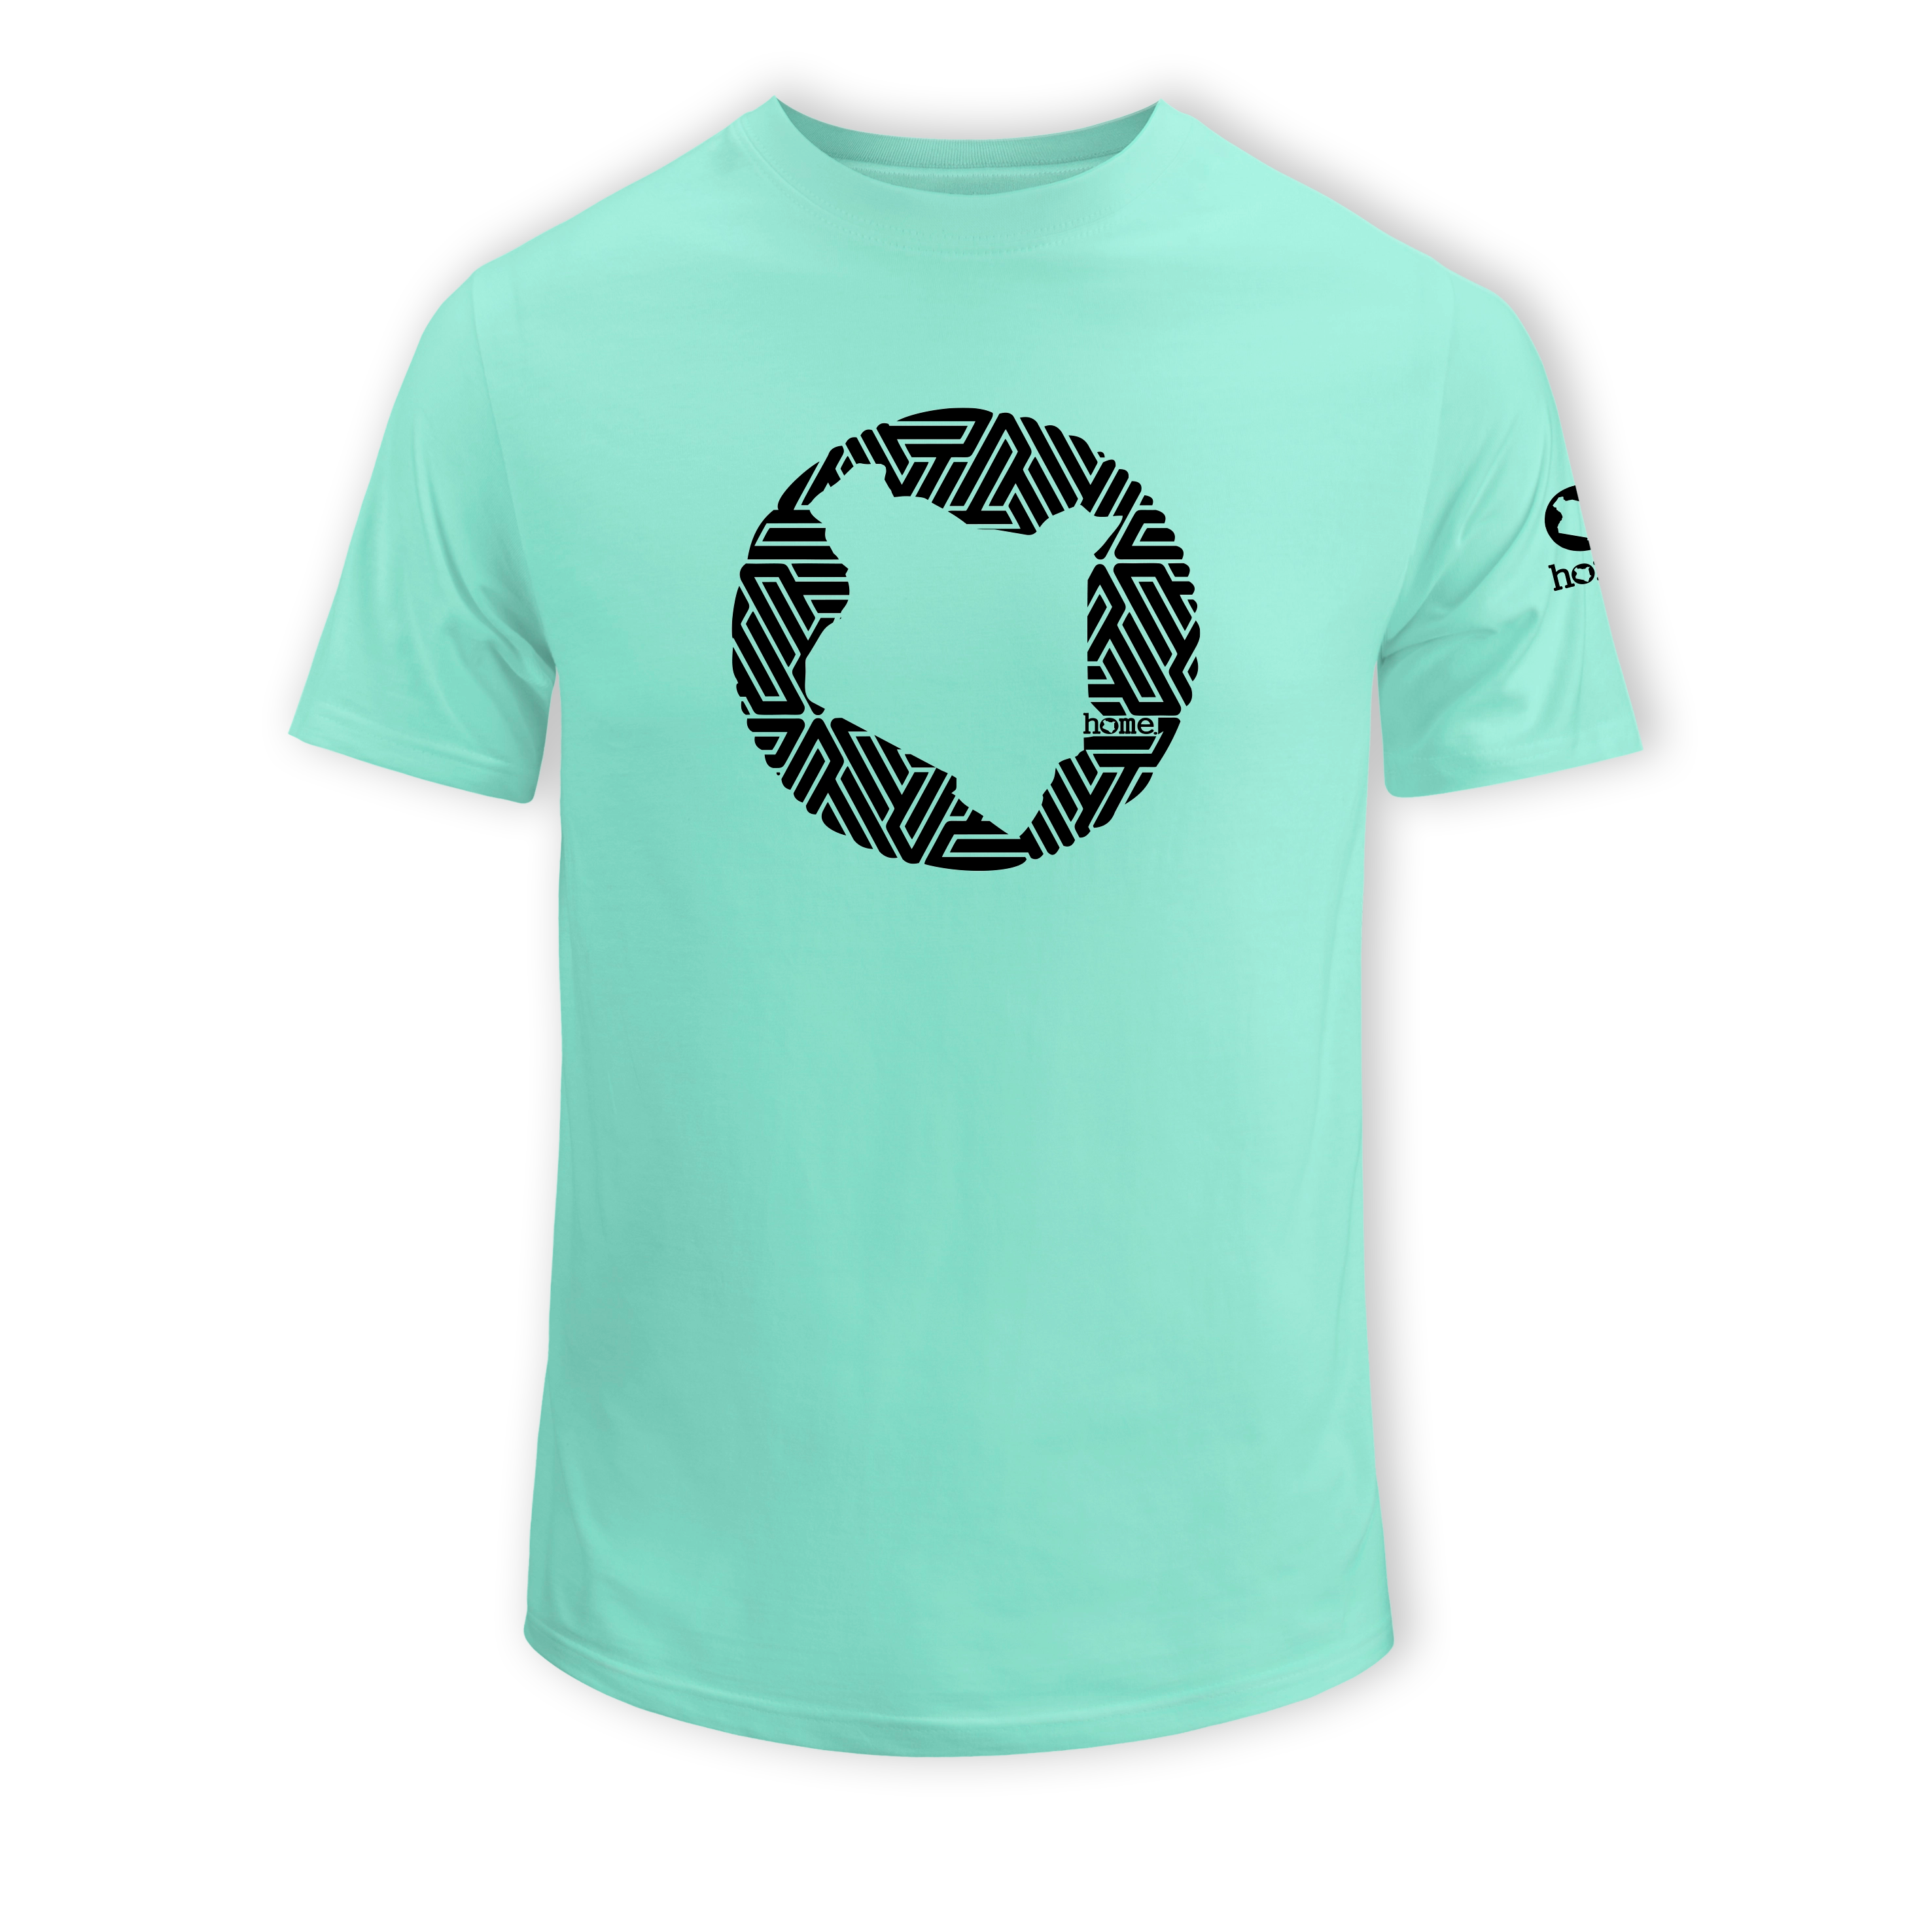 home_254 SHORT-SLEEVED TURQUOISE GREEN T-SHIRT WITH A BLACK MAP PRINT – COTTON PLUS FABRIC